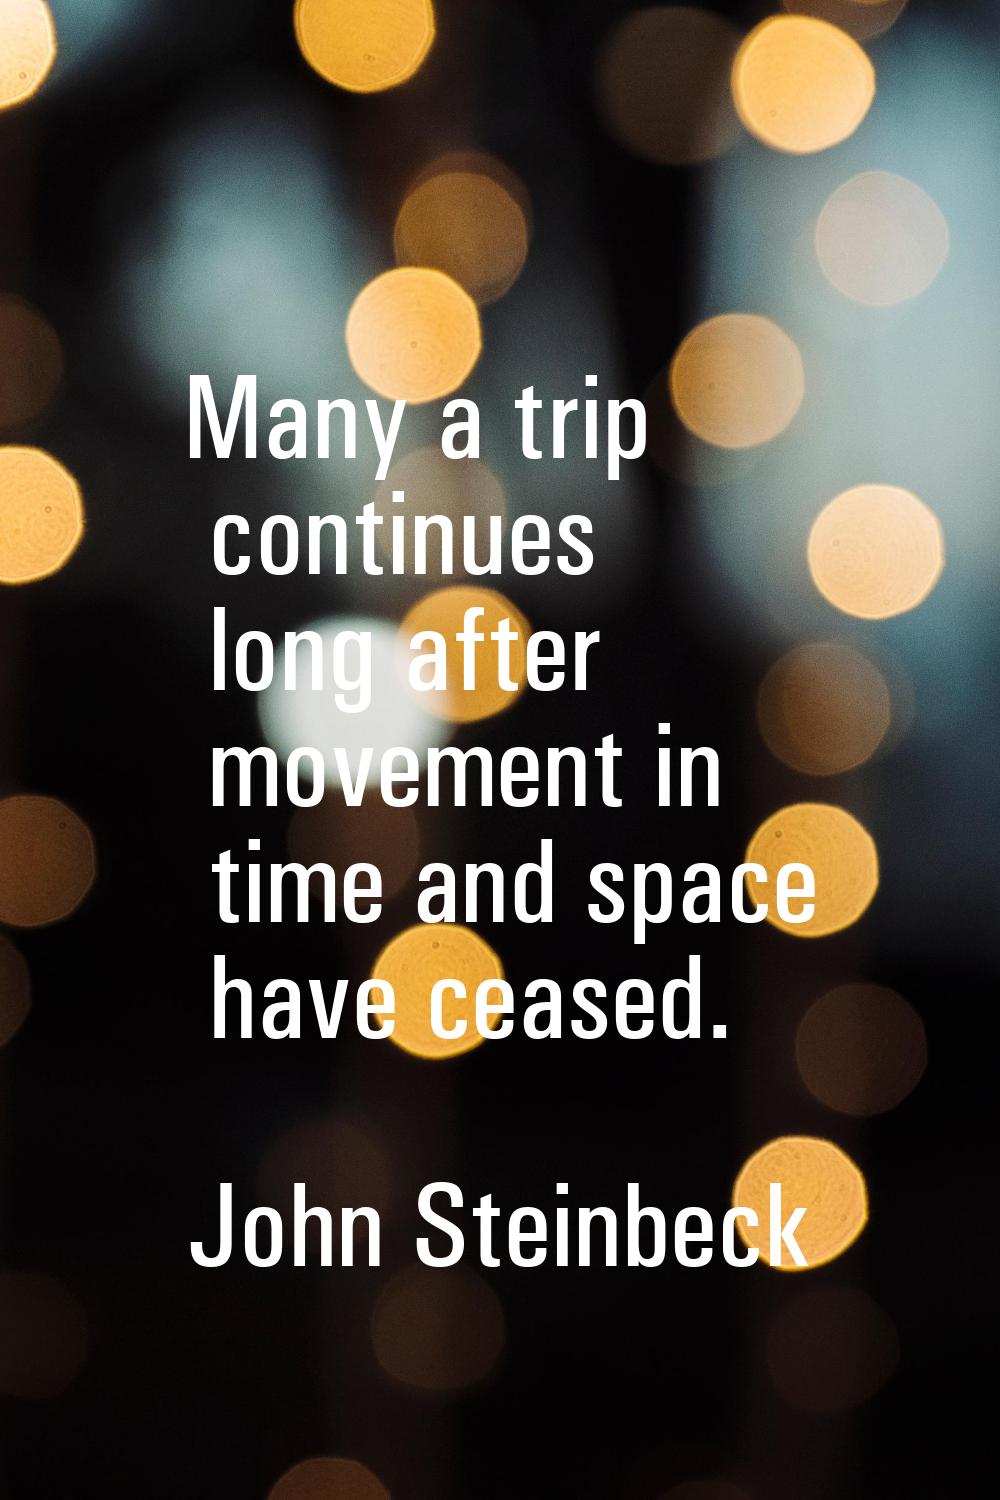 Many a trip continues long after movement in time and space have ceased.